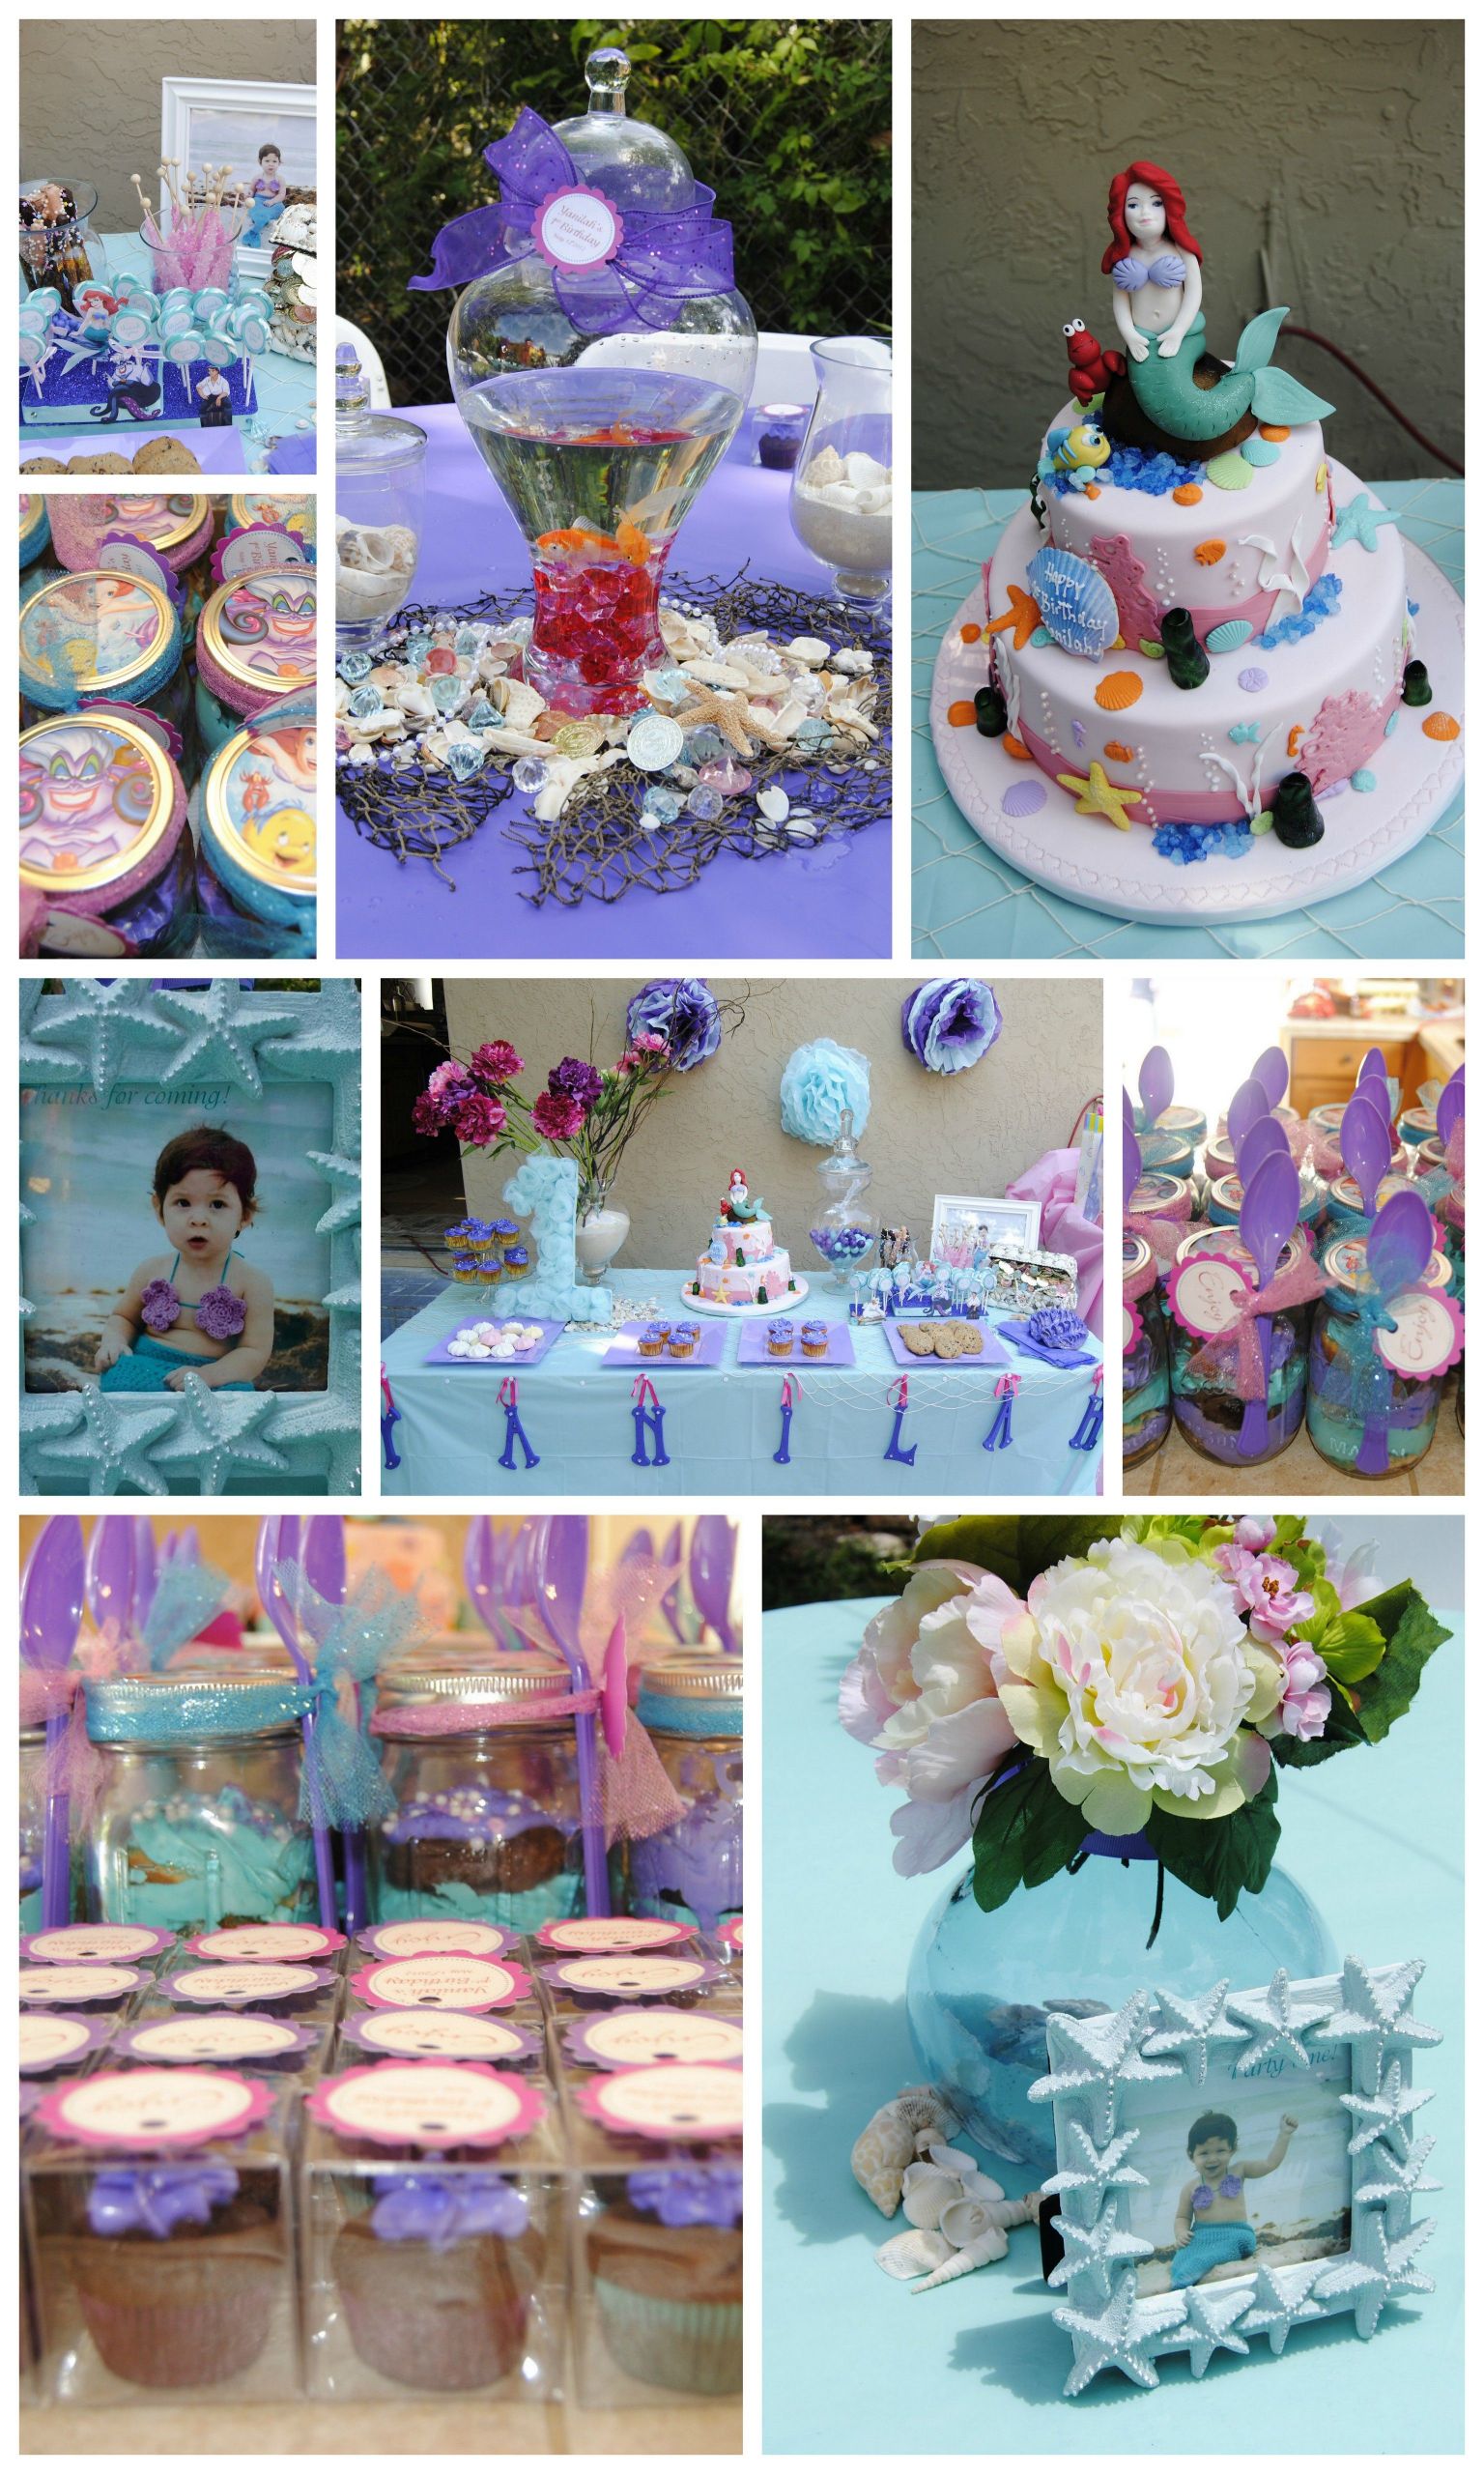 Little Mermaid Birthday Party Decorations
 Little Mermaid Birthday party